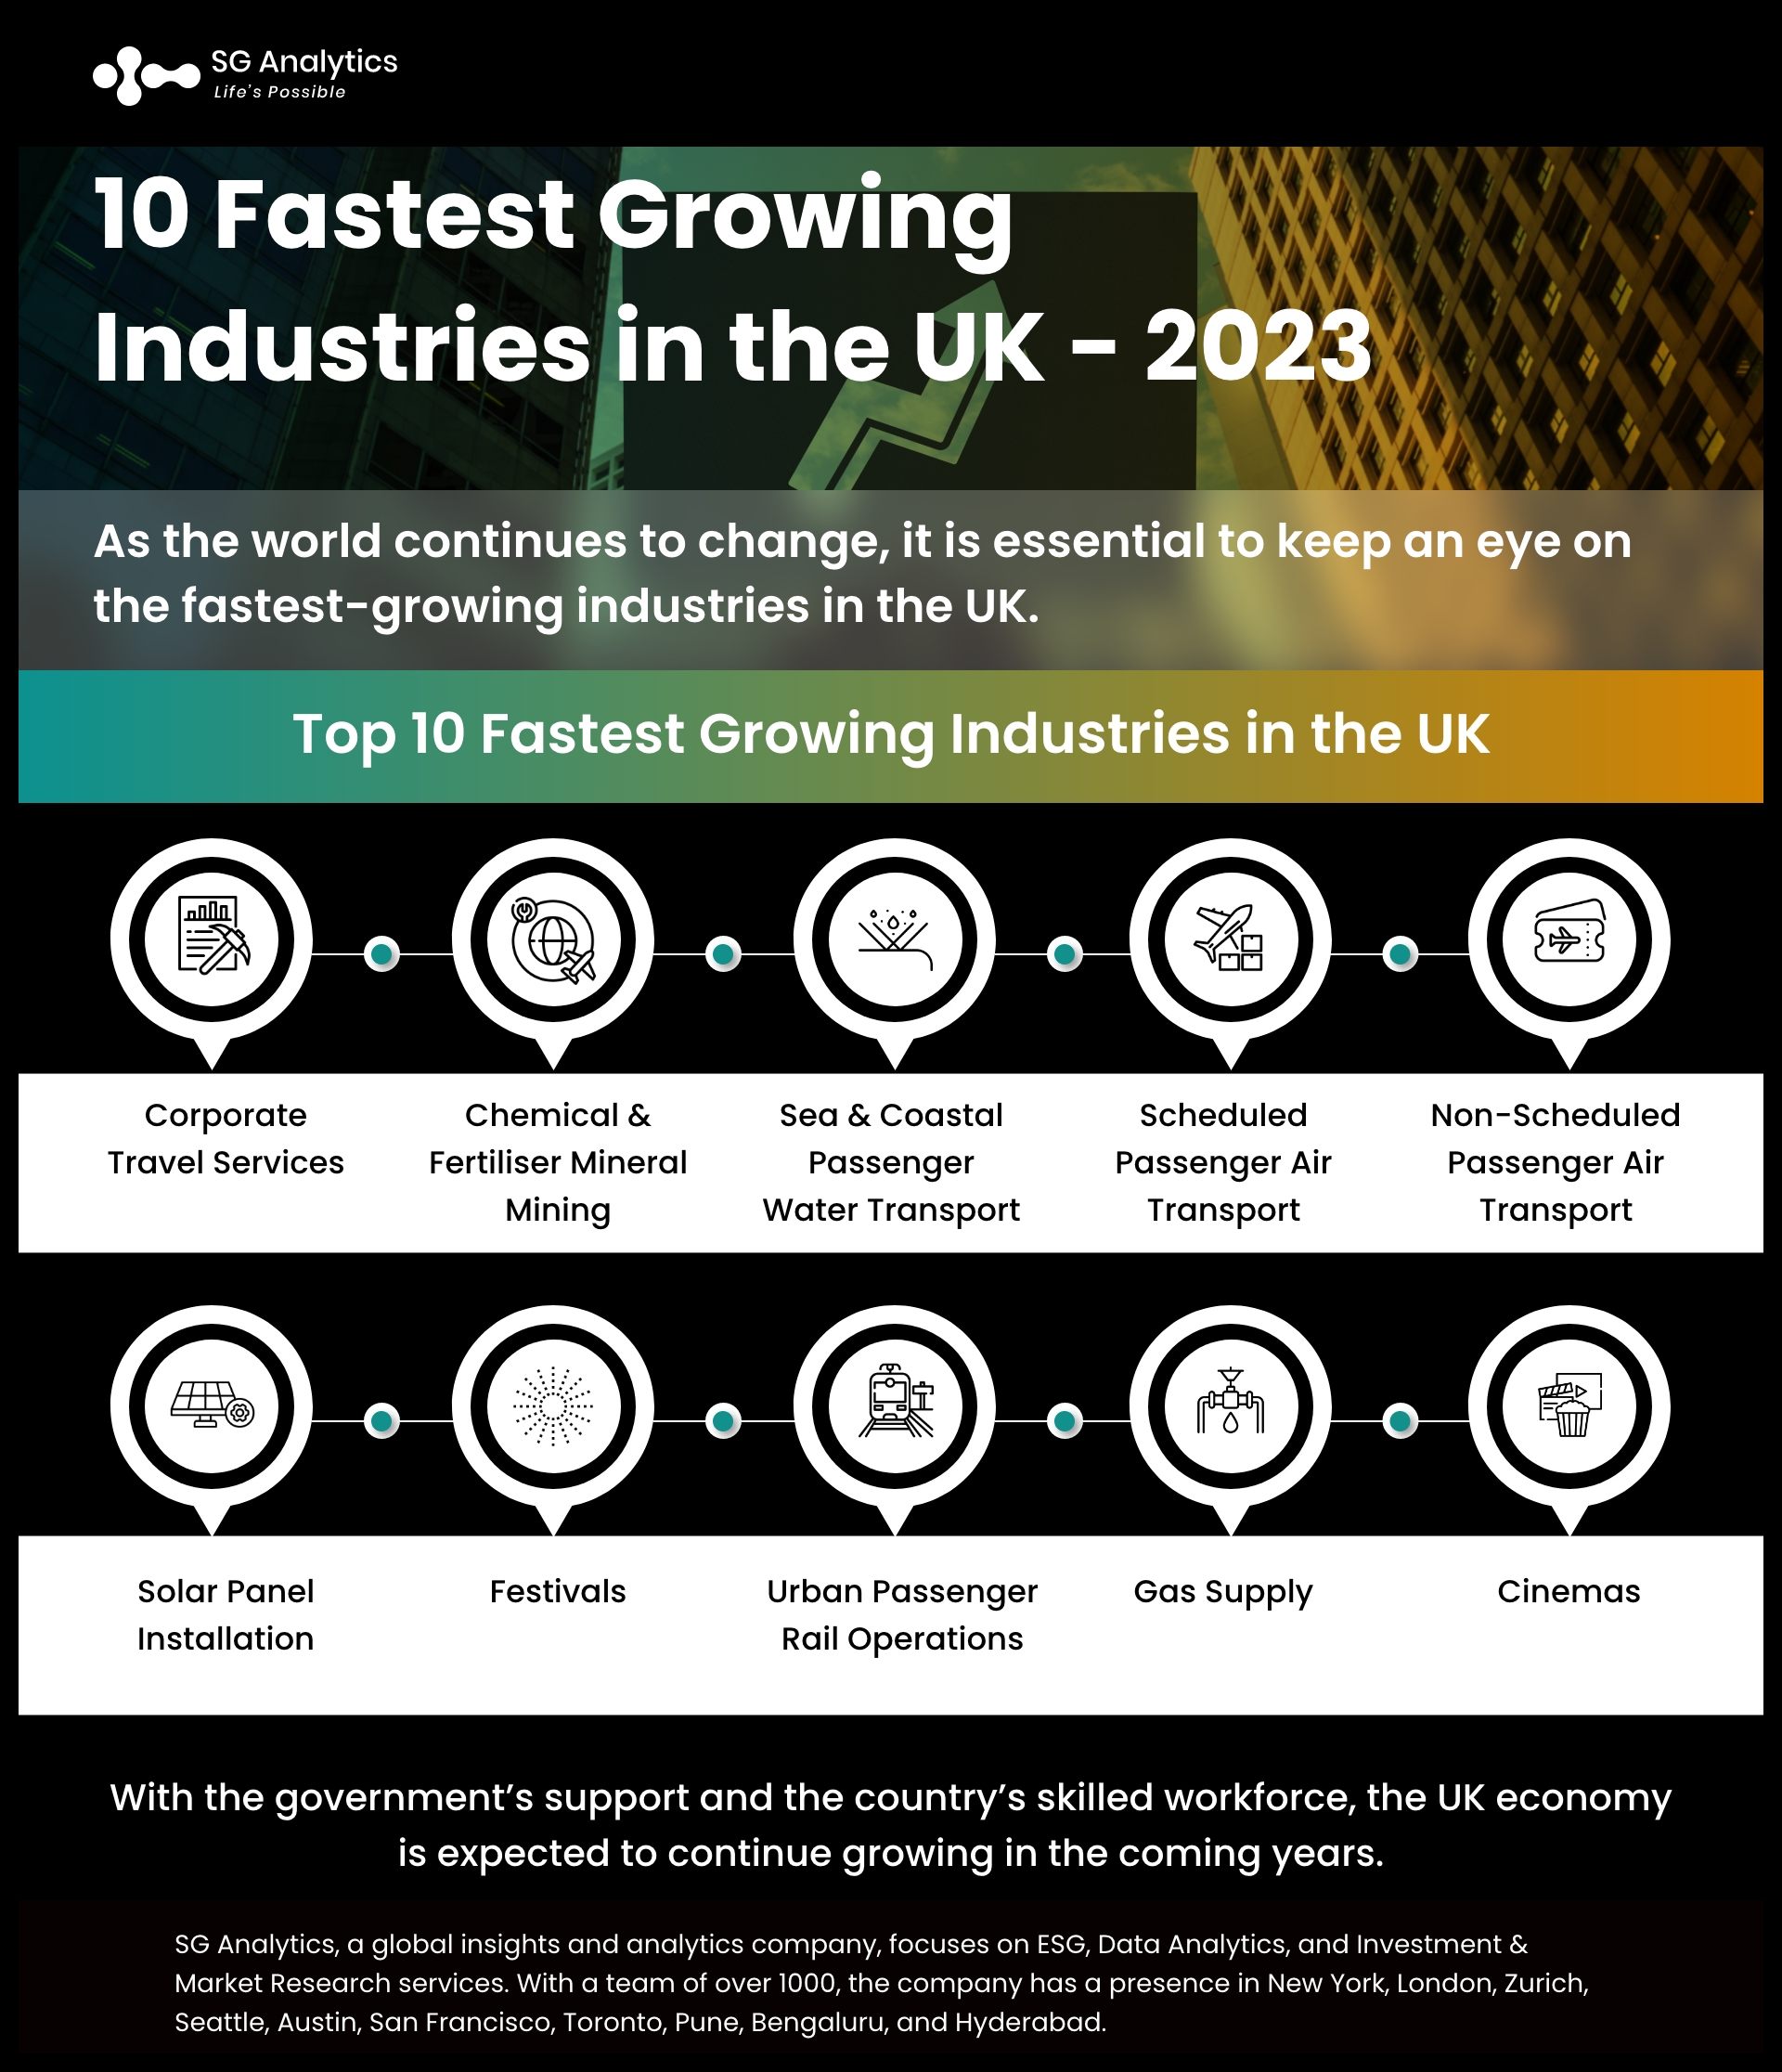 10 Fastest Growing Industries in the UK - 2023 